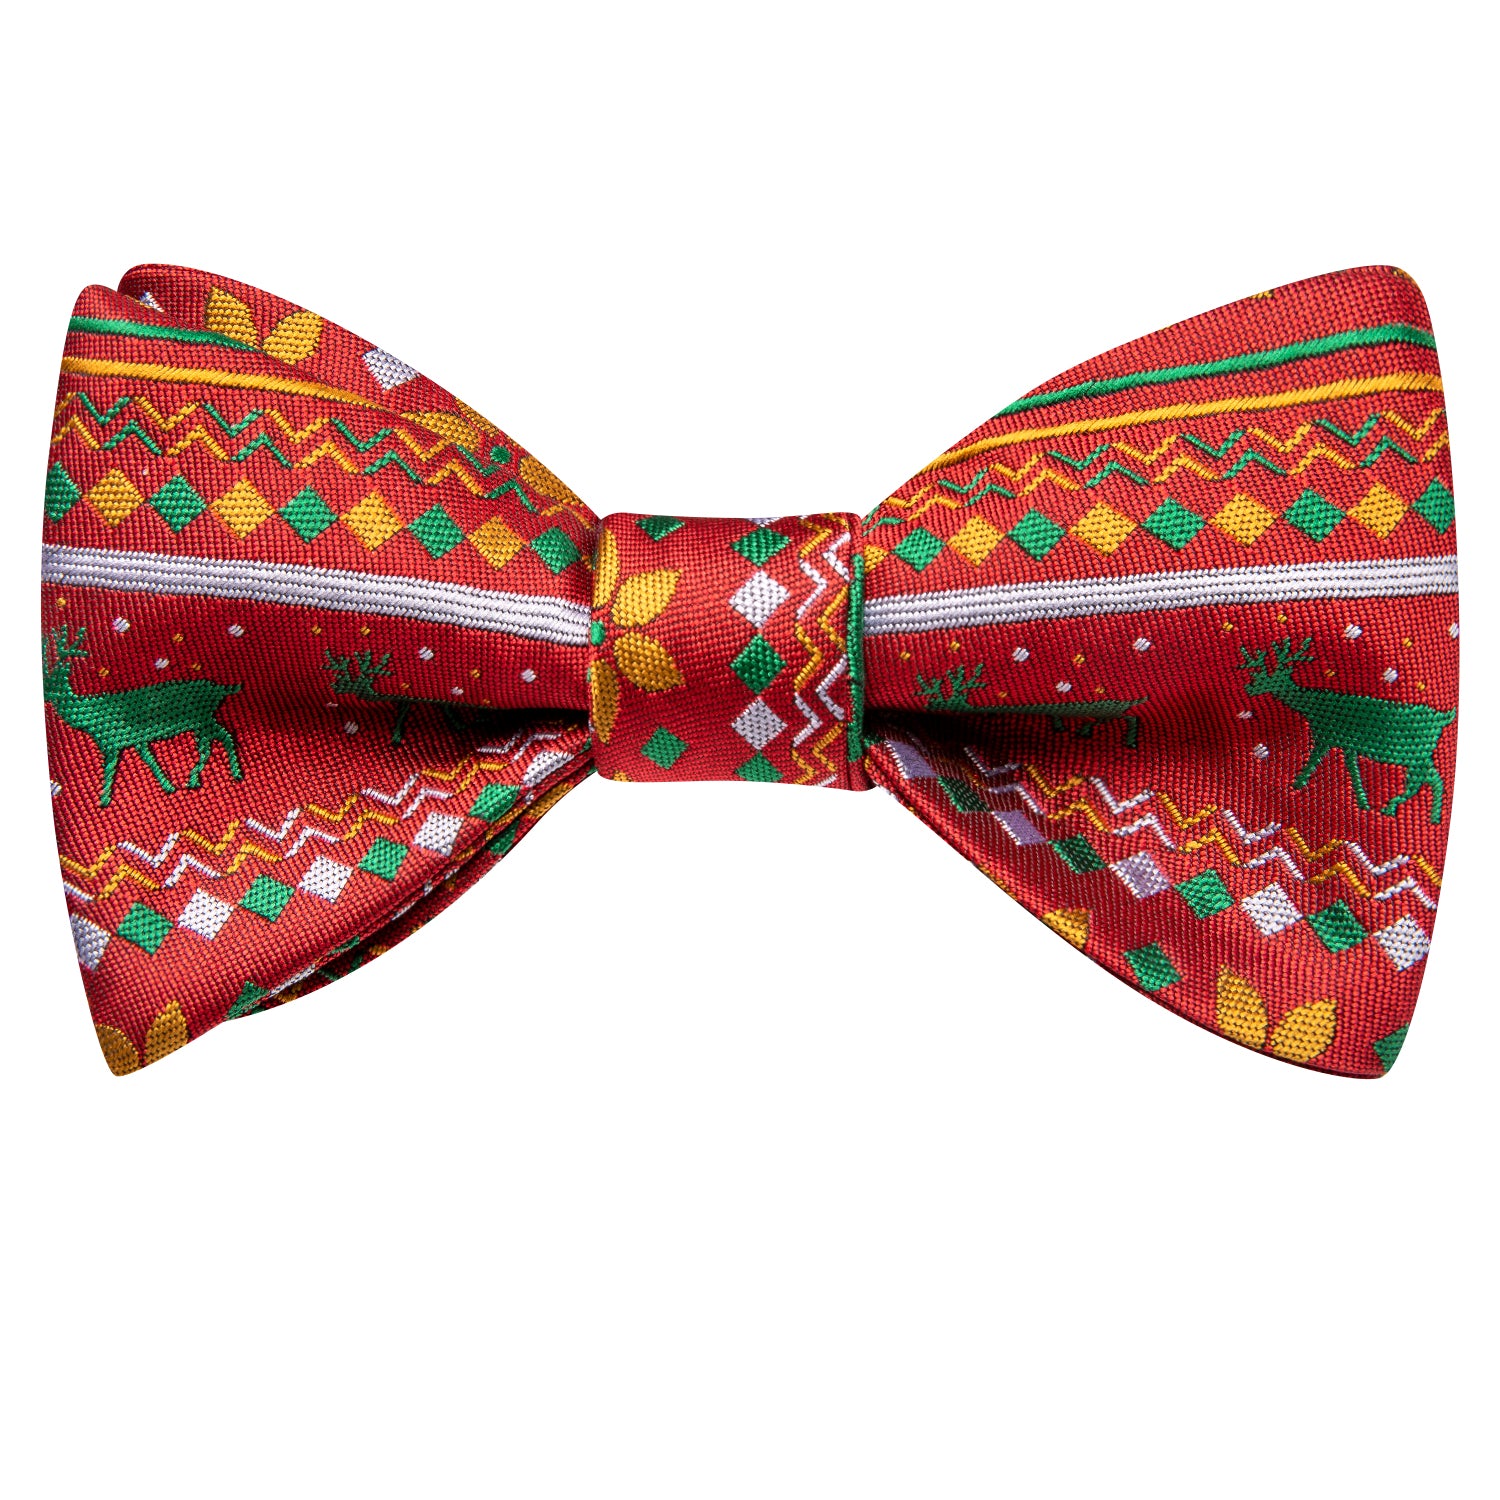 Red Green Christmas Novelty Self-tied Bow Tie Hanky Cufflinks Set